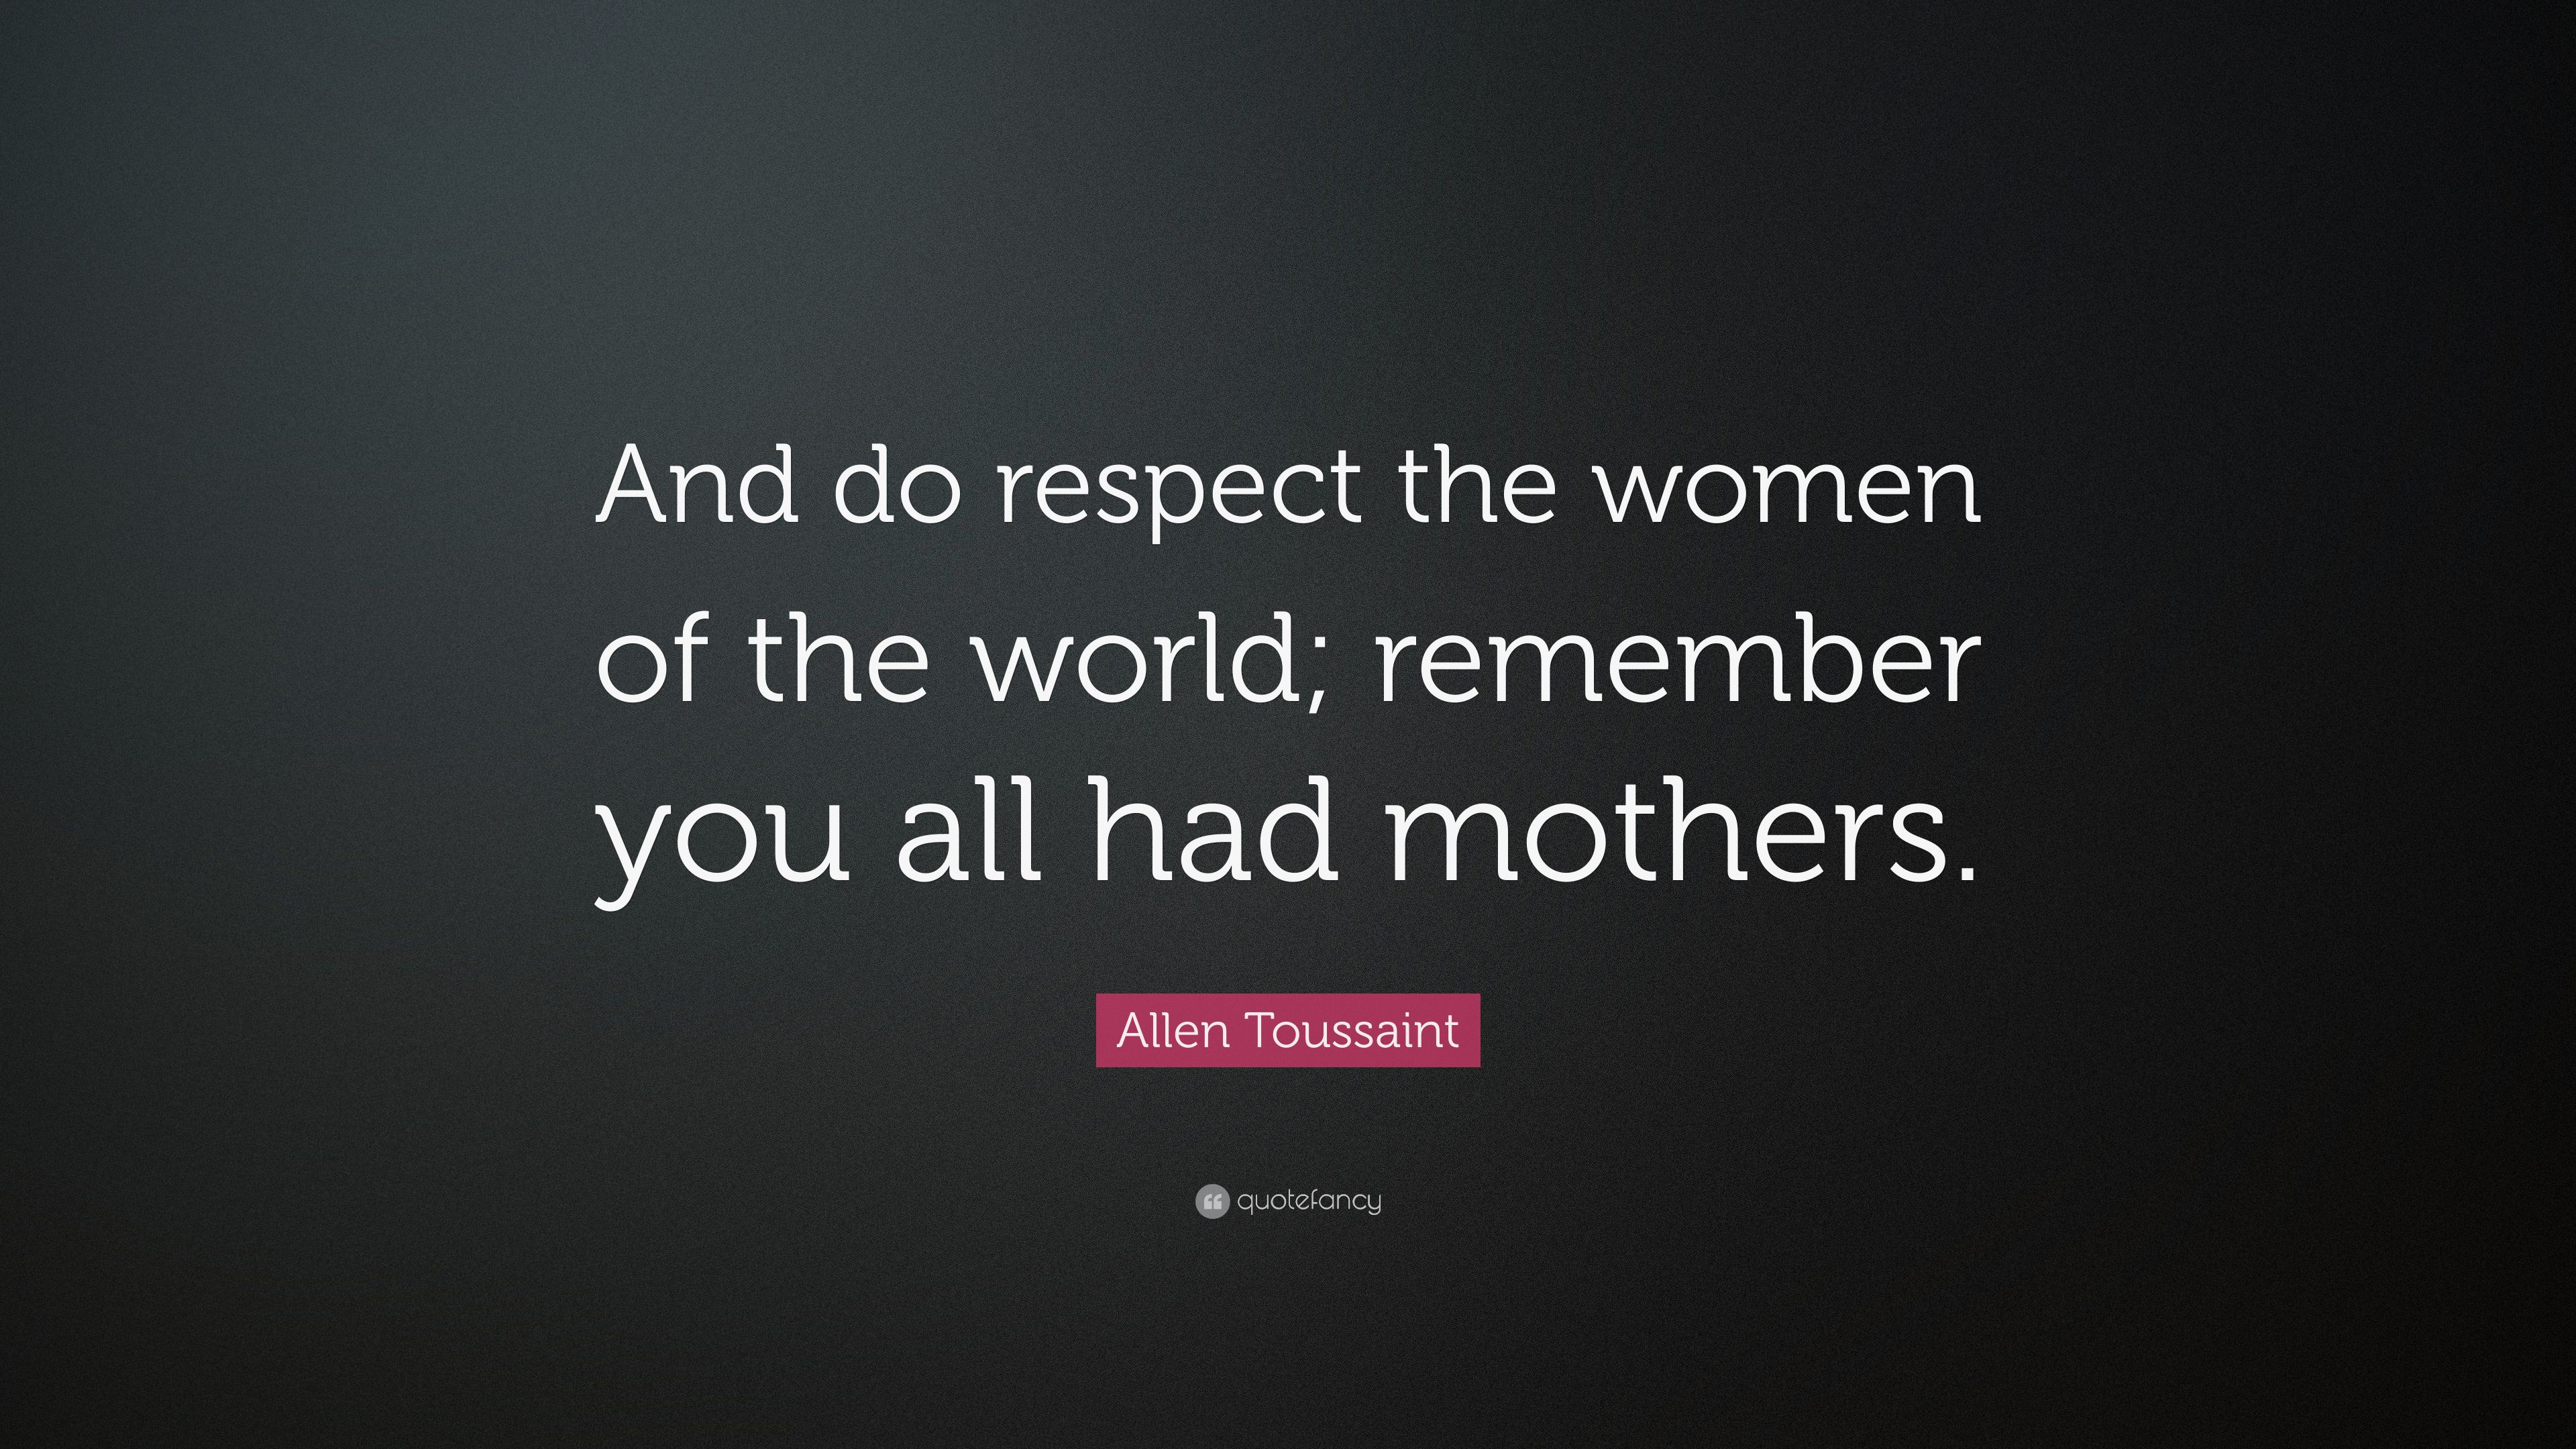 Allen Toussaint Quote: “And do respect the women of the world